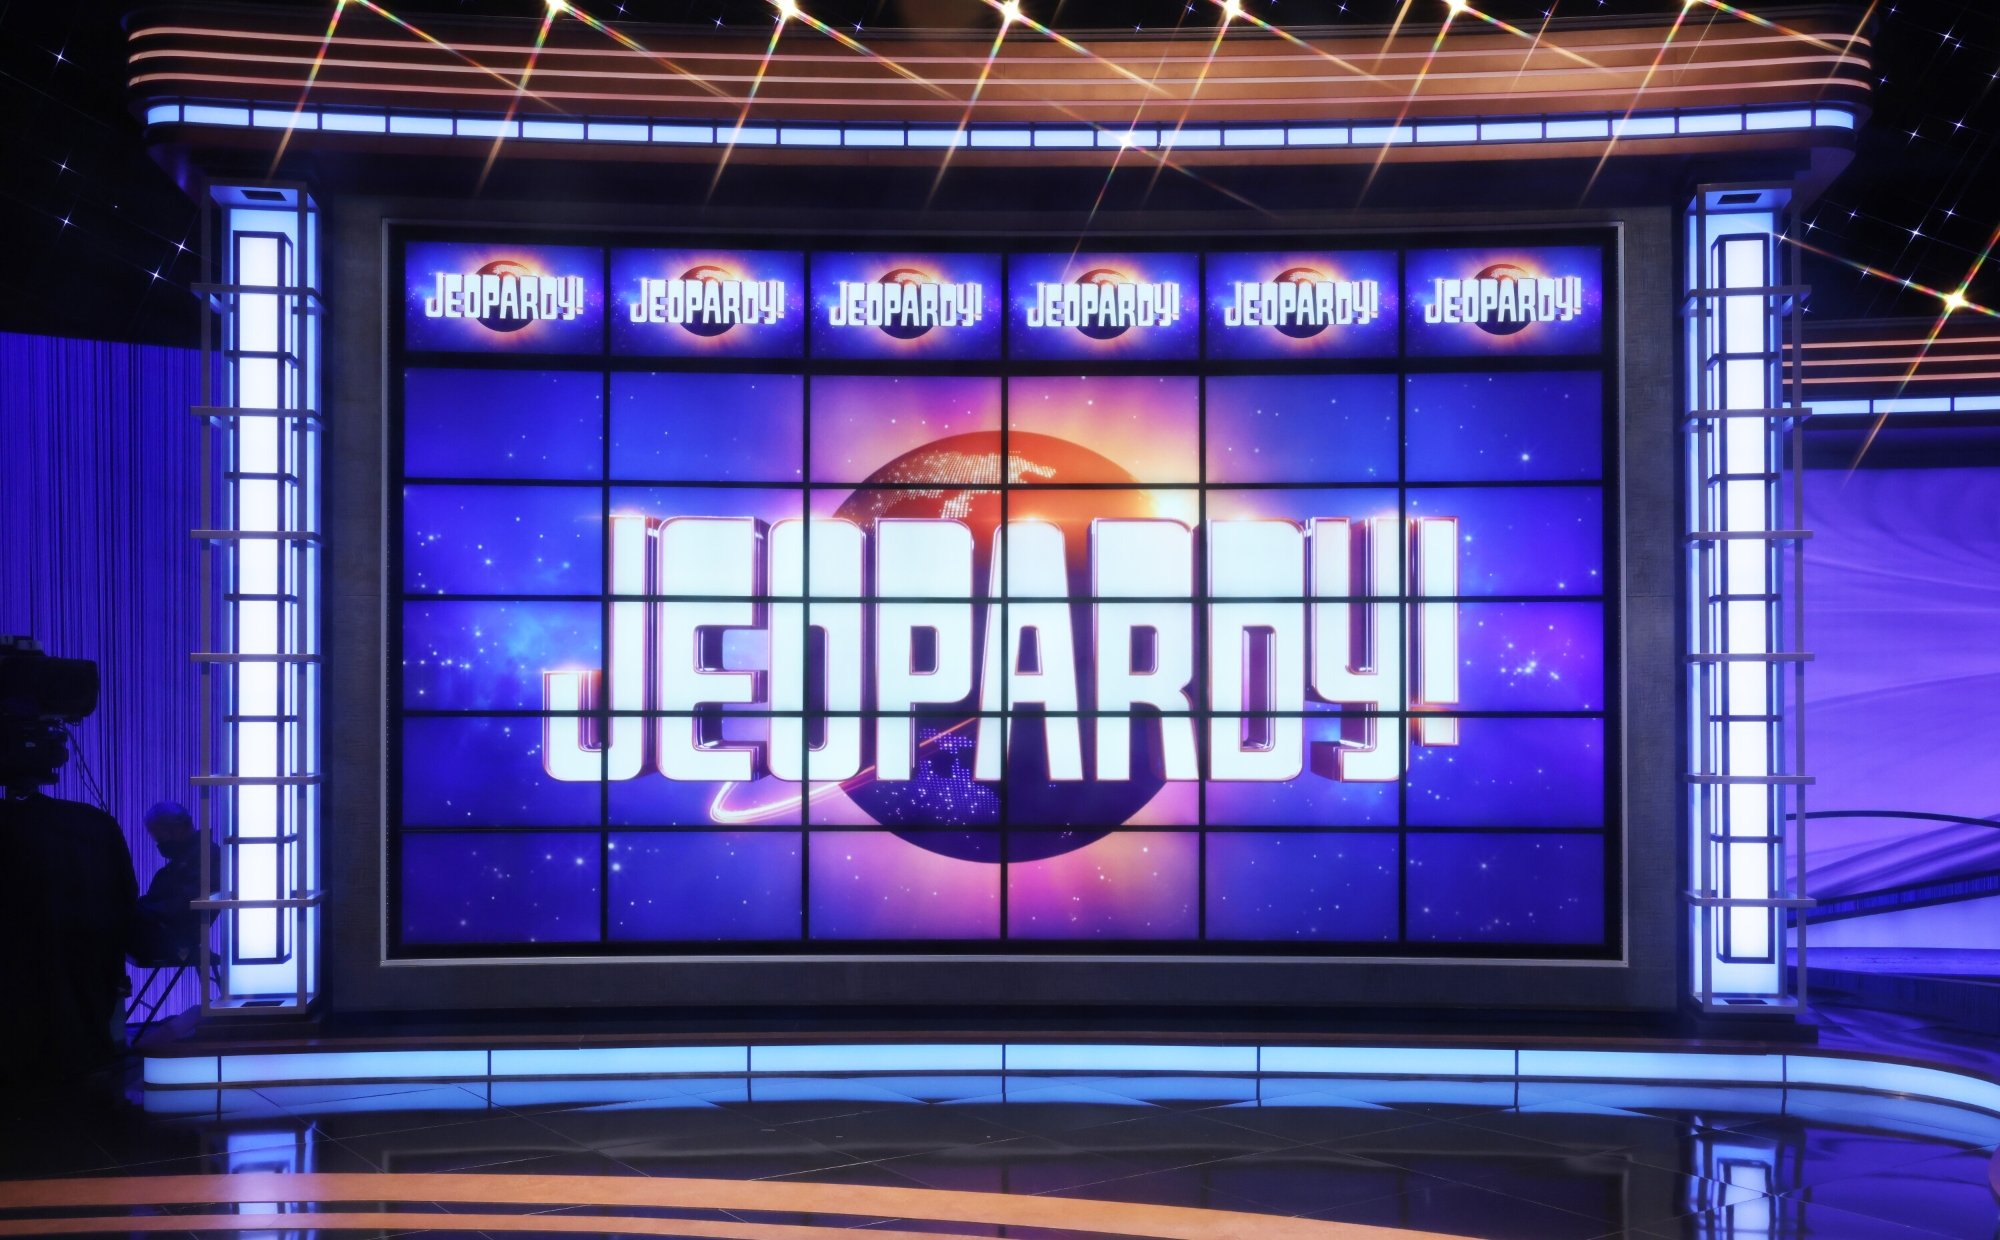 ‘Jeopardy!’ Fans Are Cracking Up Over ‘Current Slang’ Category Including ‘Yeet’ Response